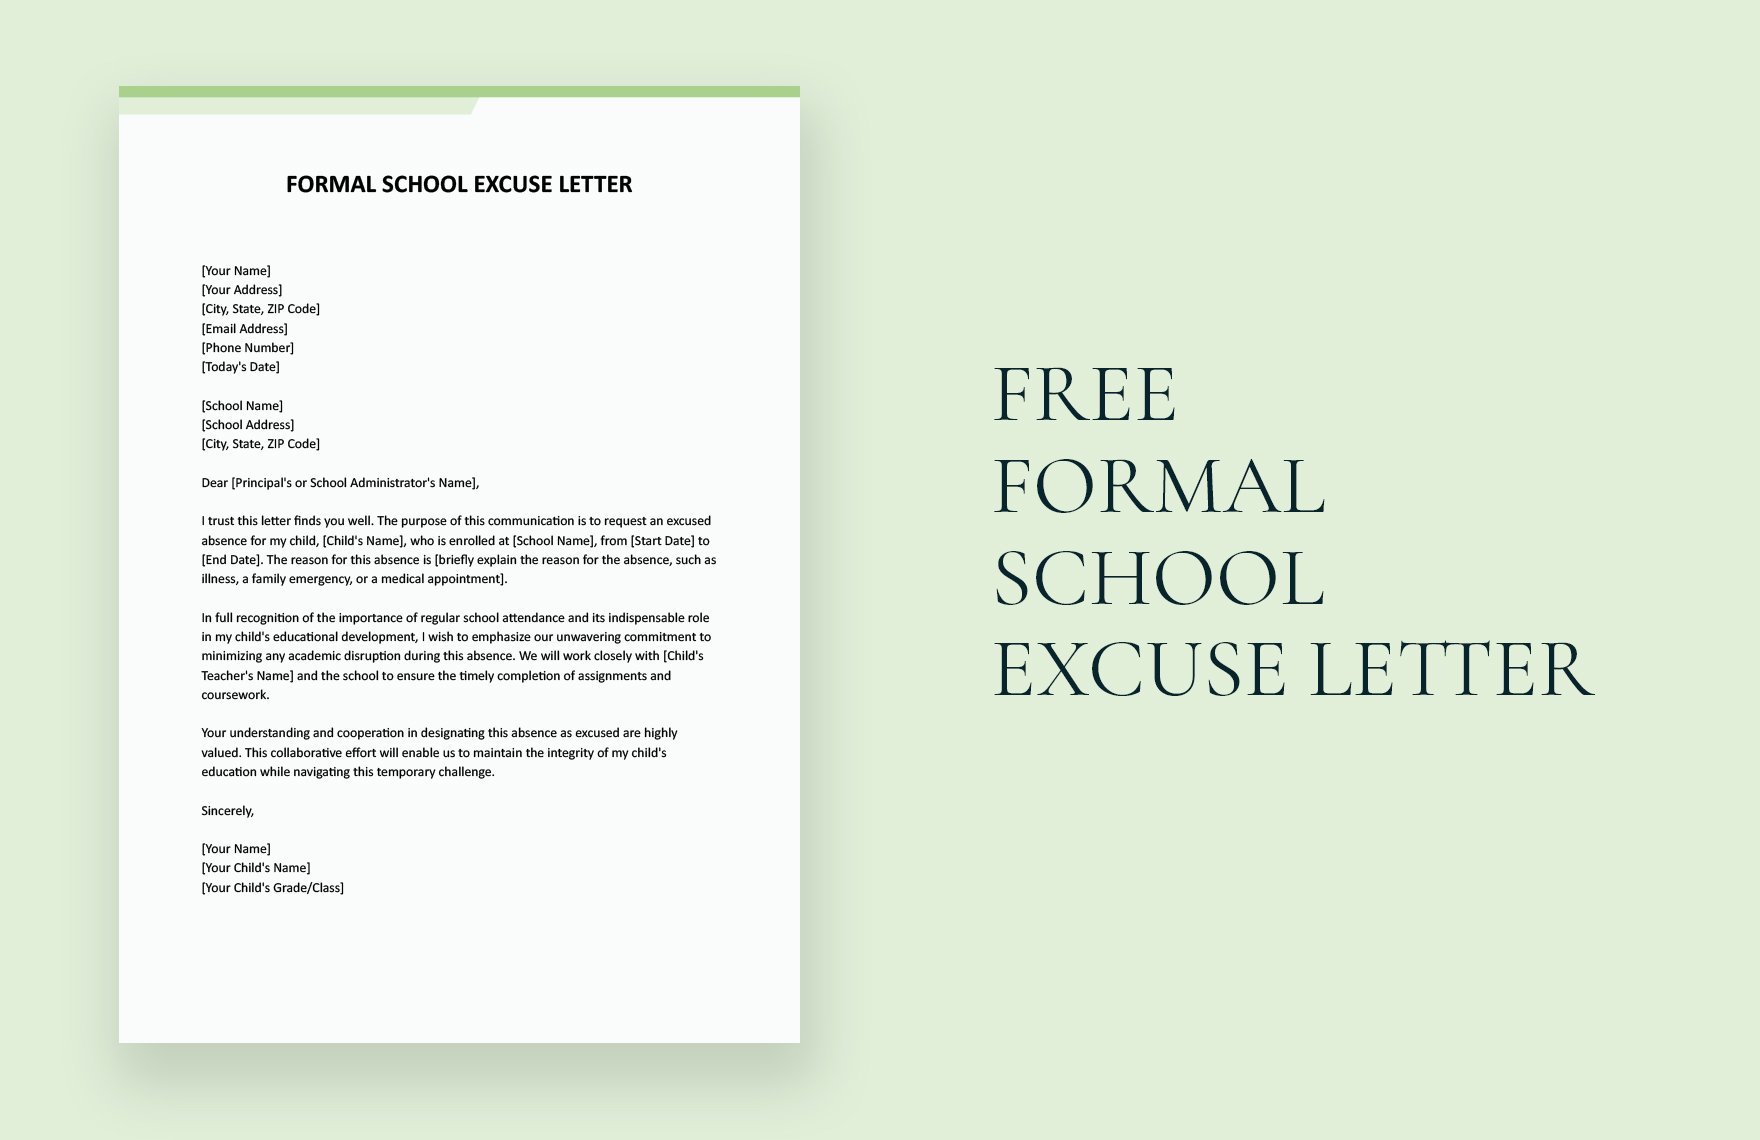 Formal School Excuse Letter